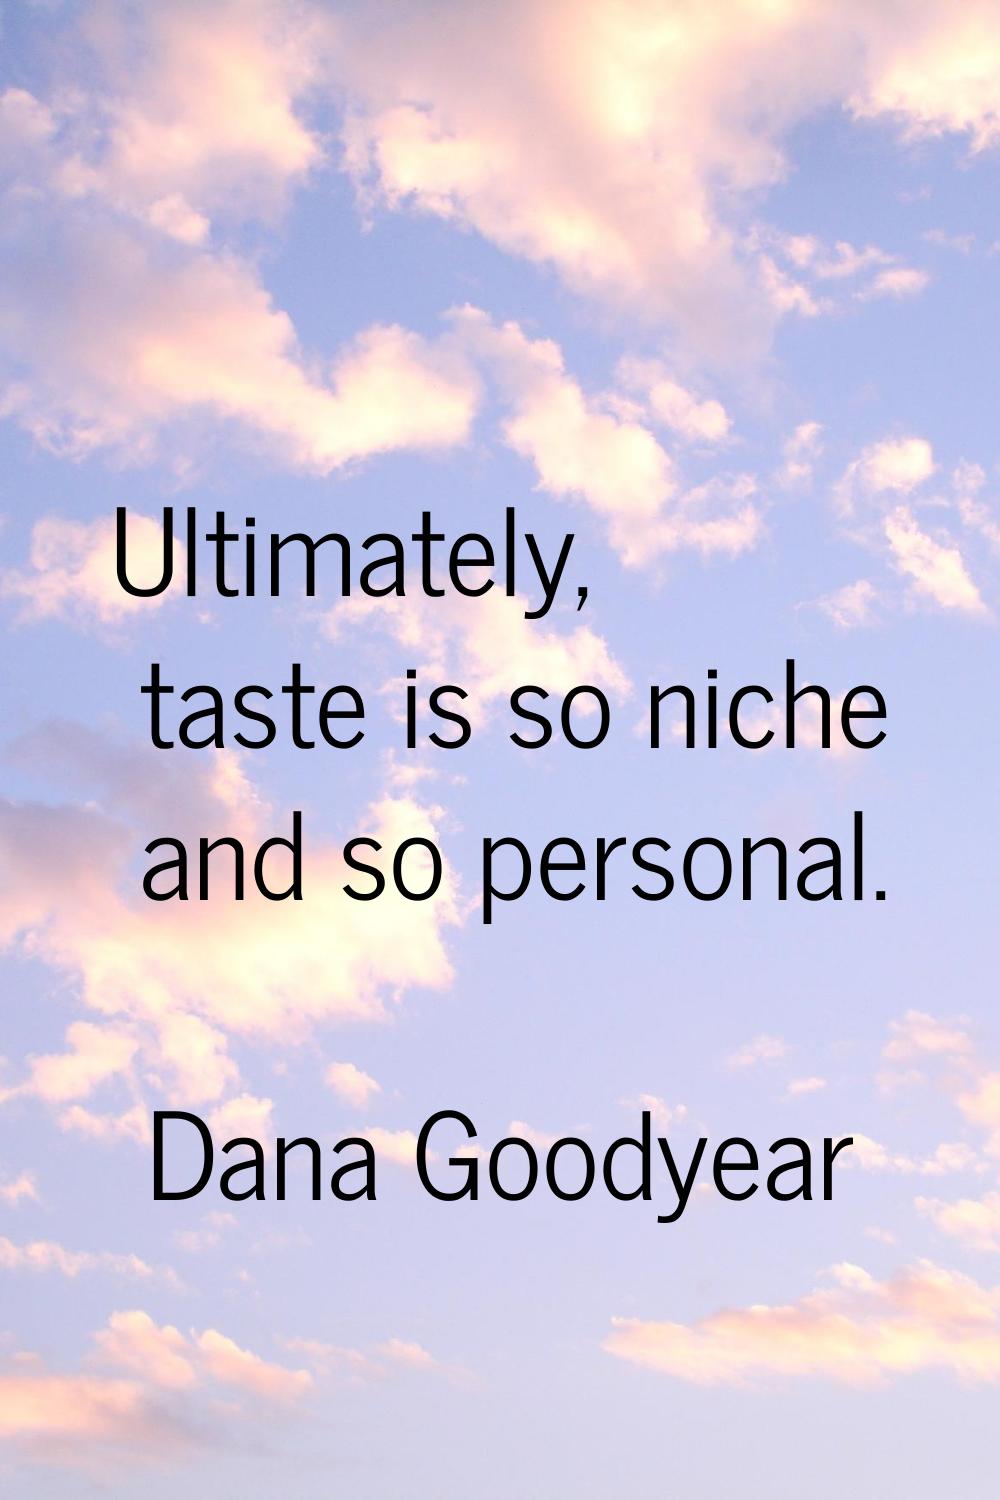 Ultimately, taste is so niche and so personal.